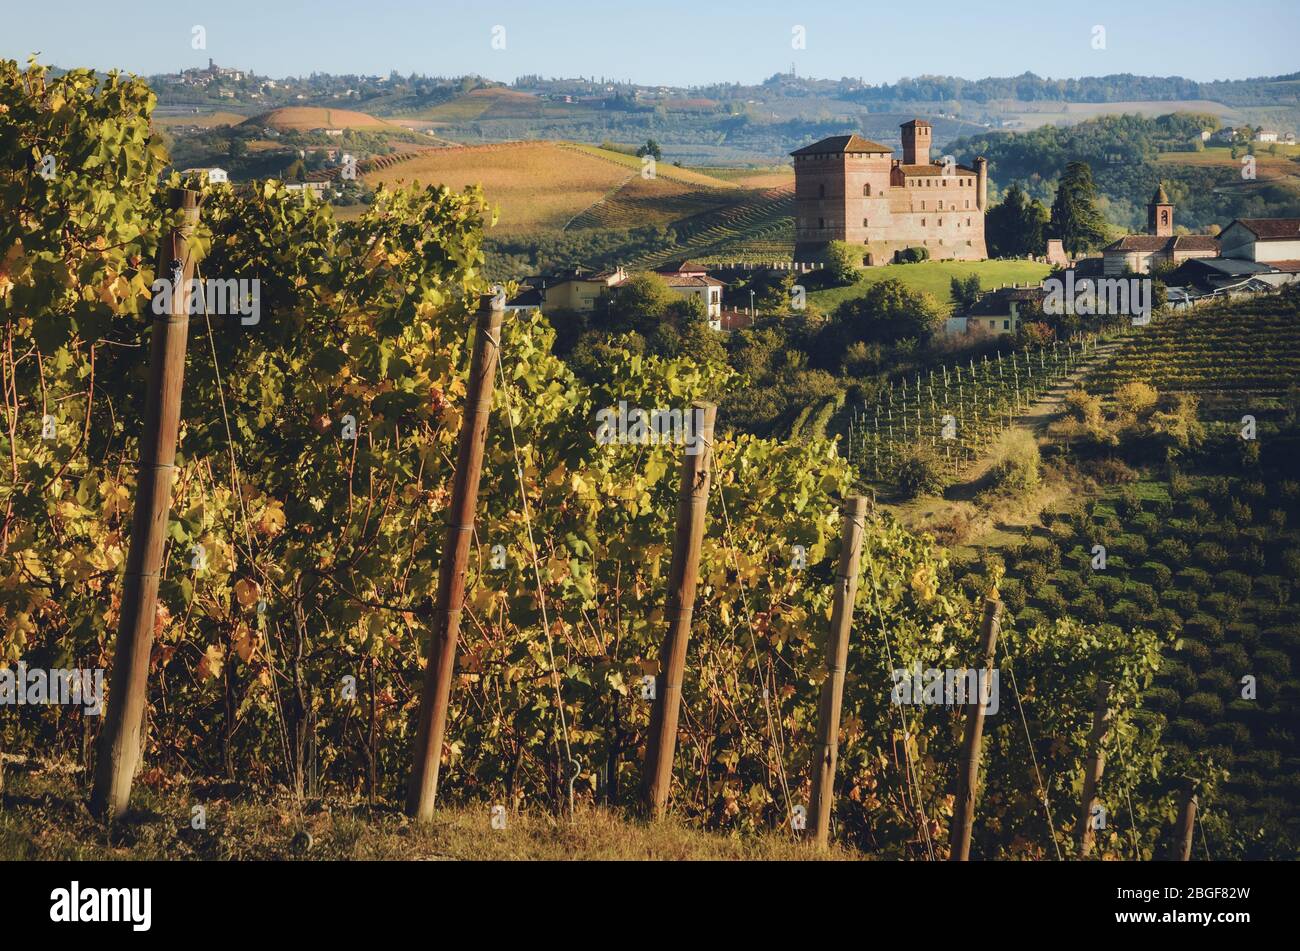 Sunset in autumn, during harvest time, at the castle of Grinzane Cavour, surrounded by the vineyards of Langhe, wine district of Italy Stock Photo